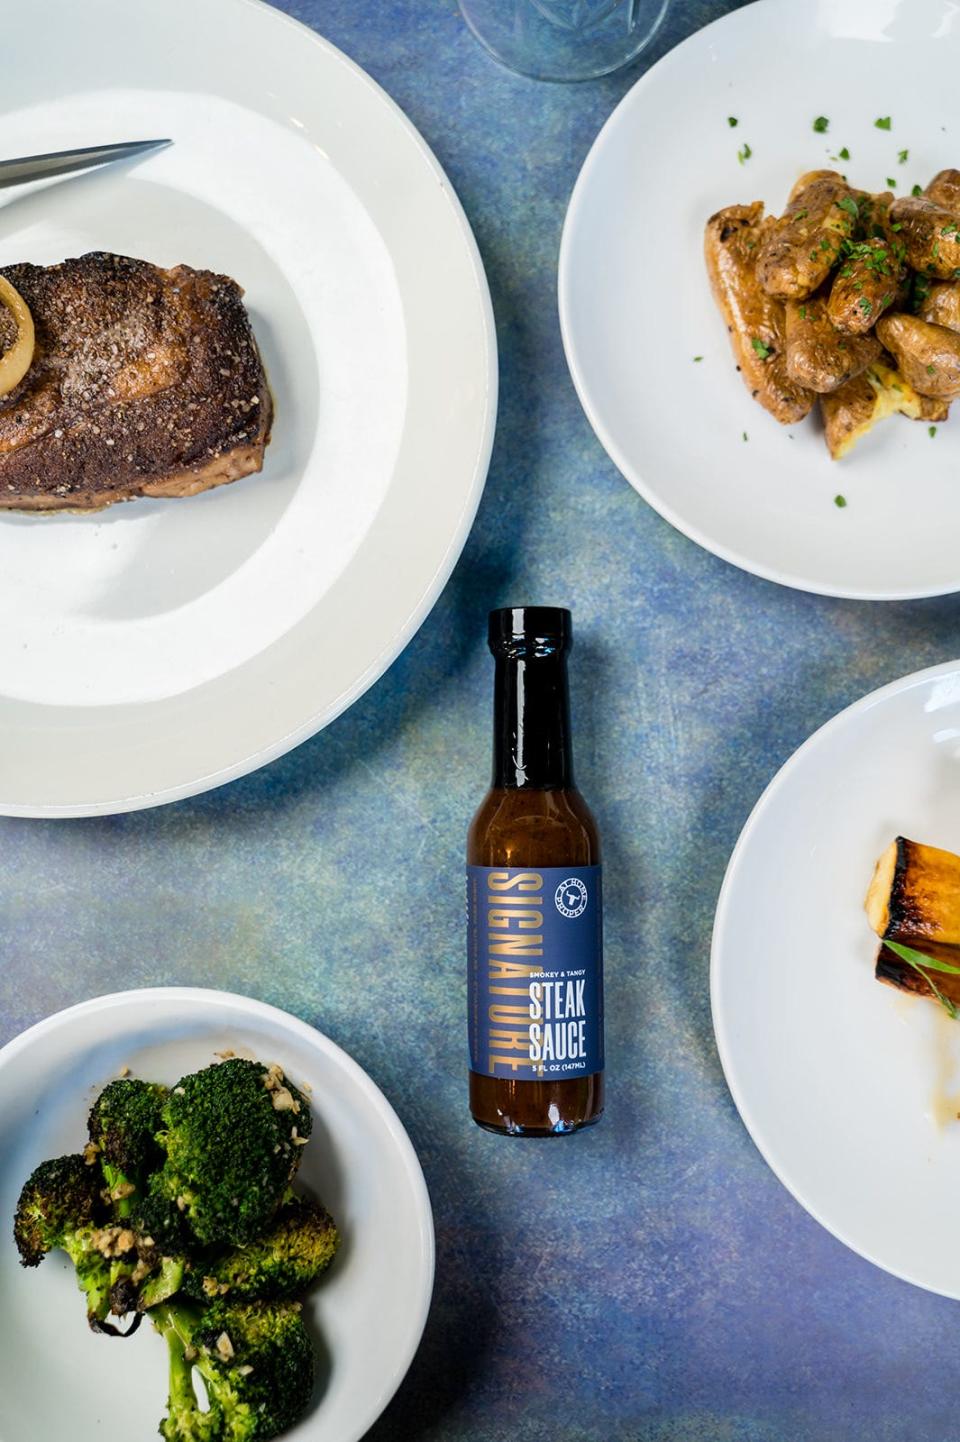 Asheville Proper restaurant has released a retail line of its signature steak sauce with recommended uses for various types of meat and vegetables.